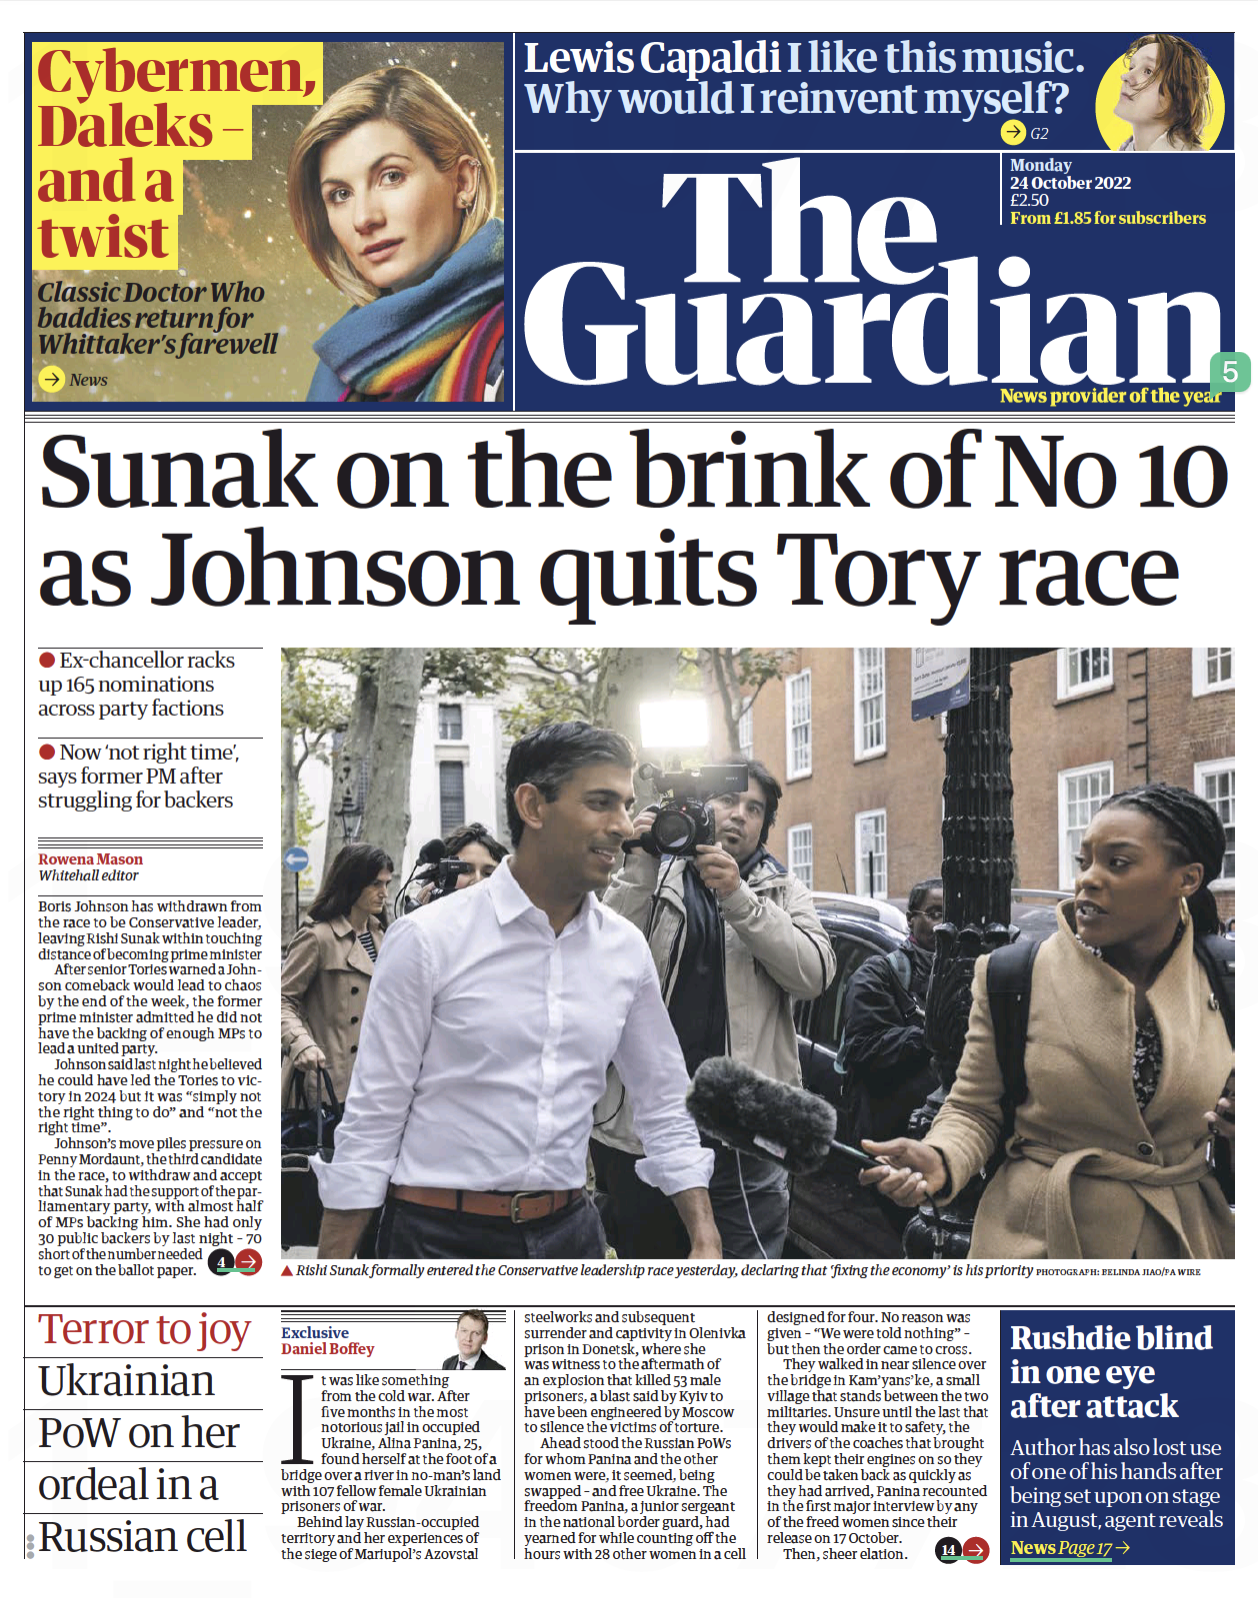 The Guardian - Oct 2022